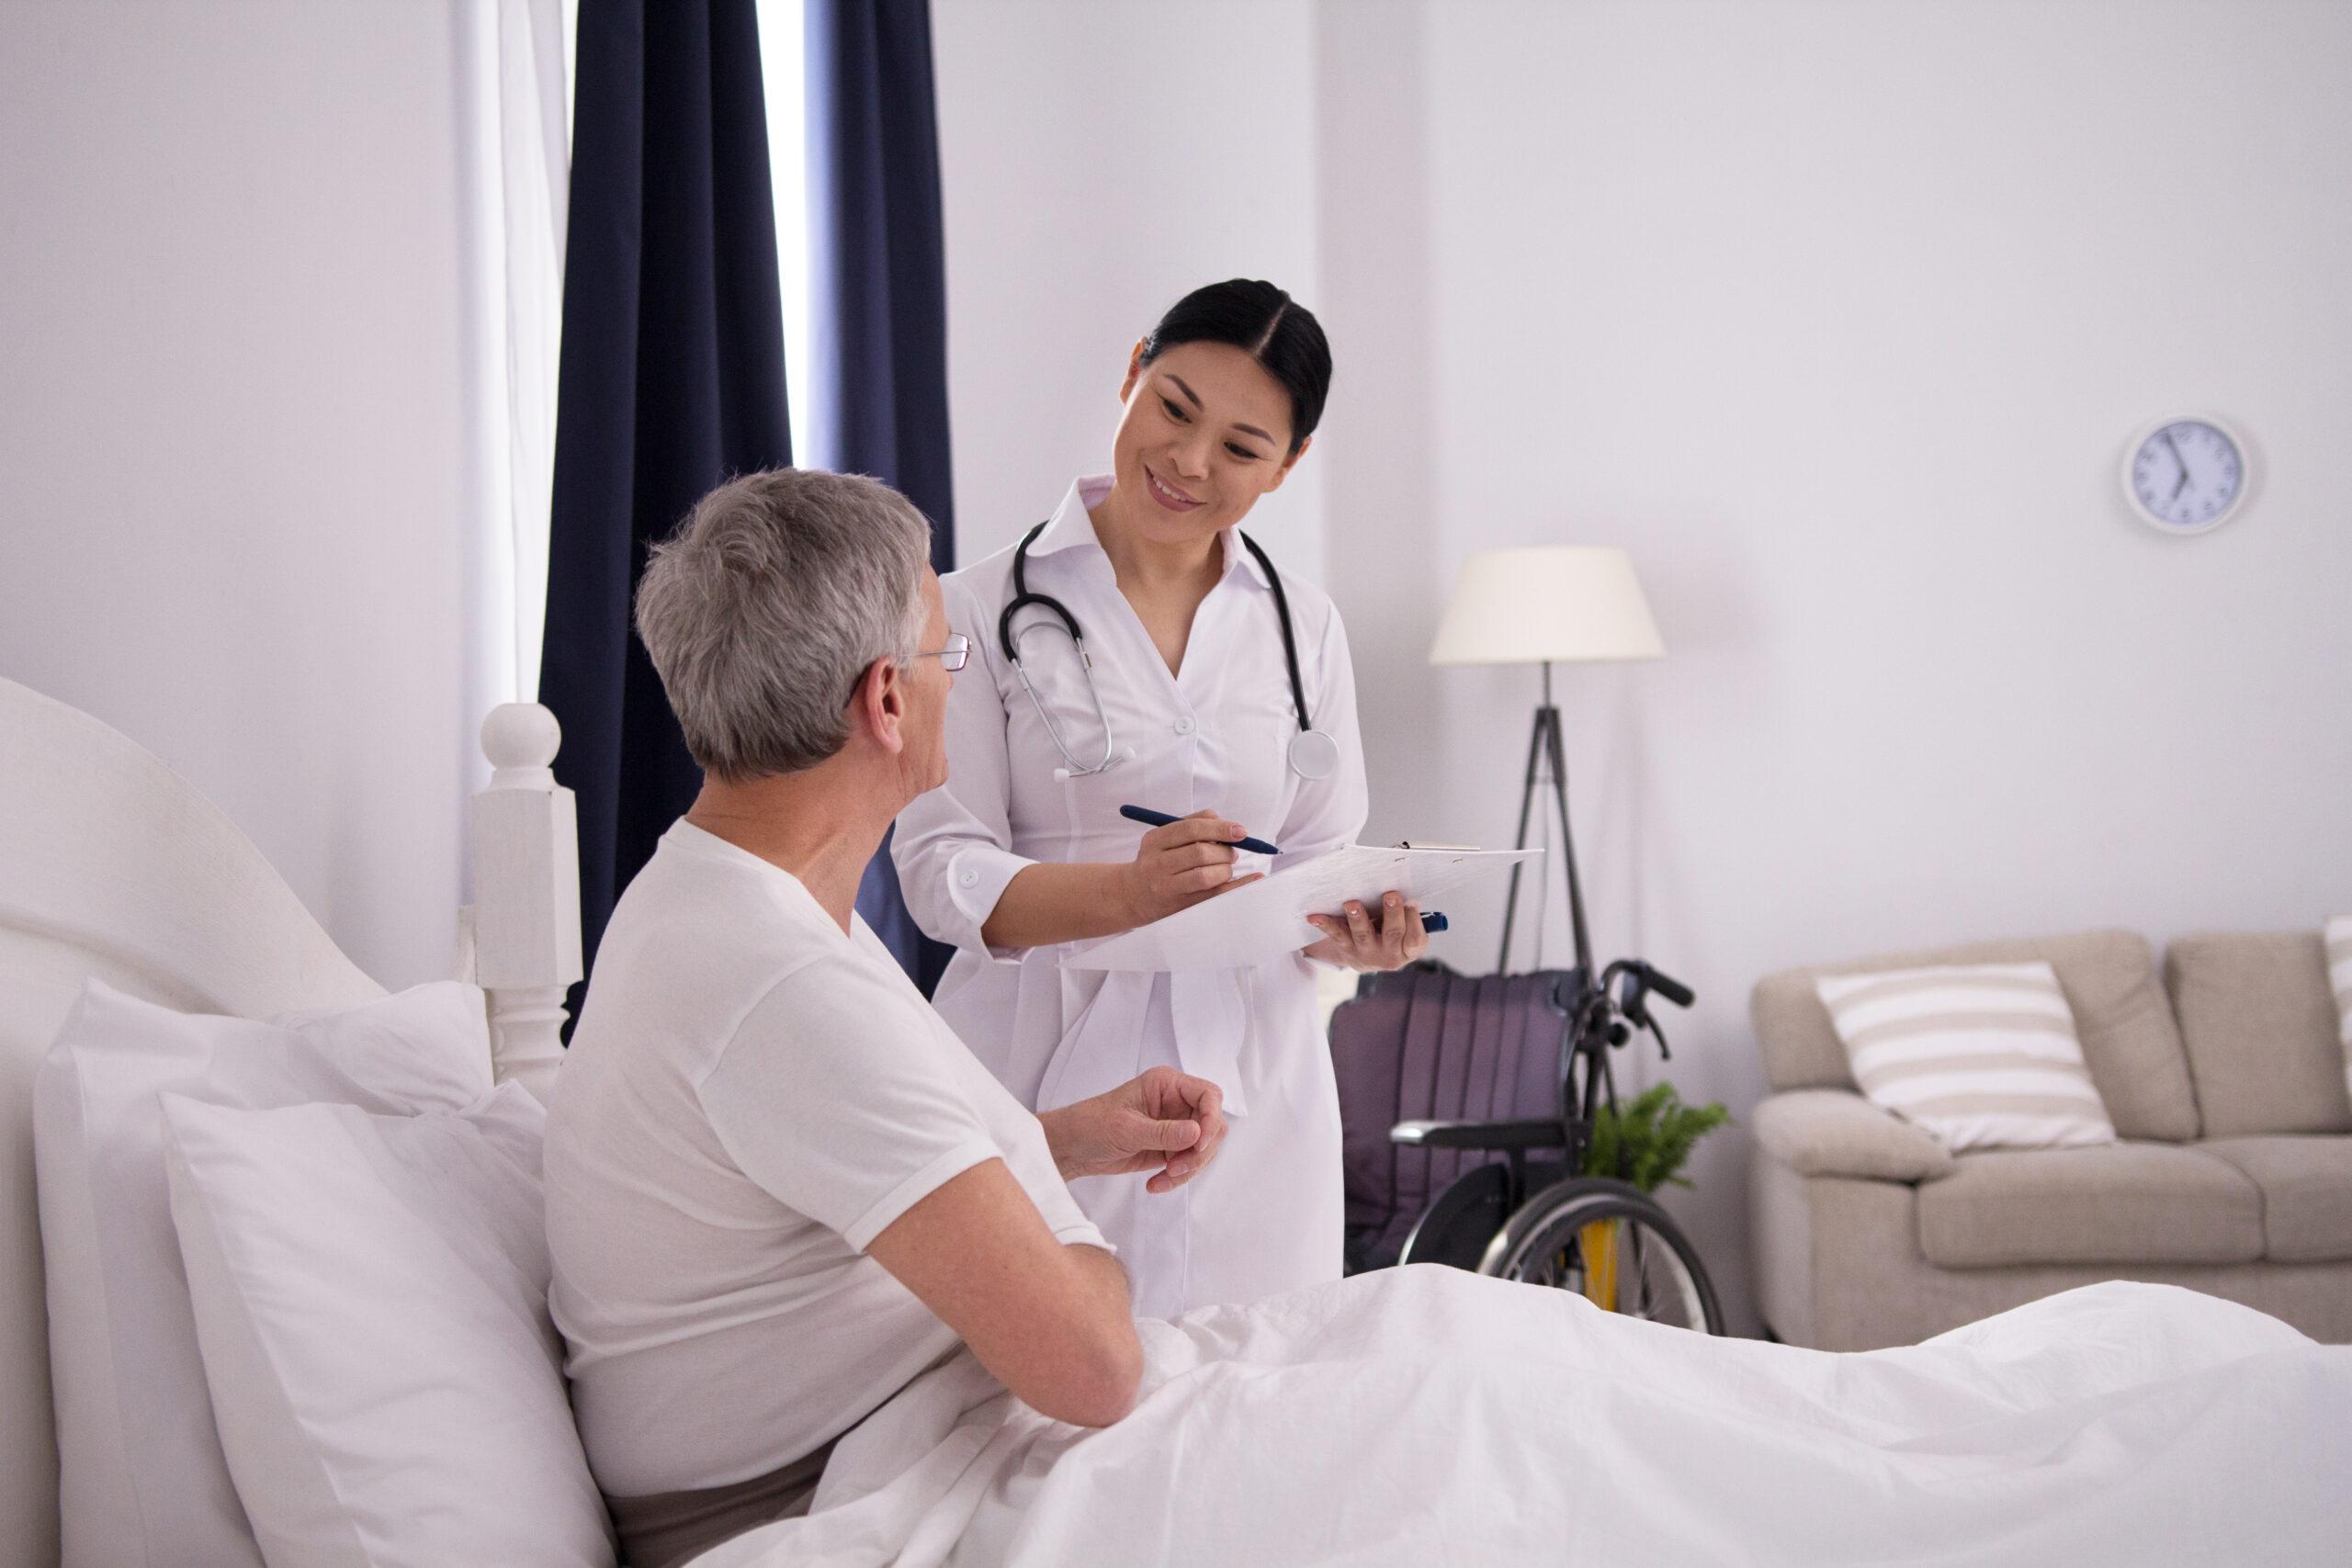 How to treat wound order in hospice care 